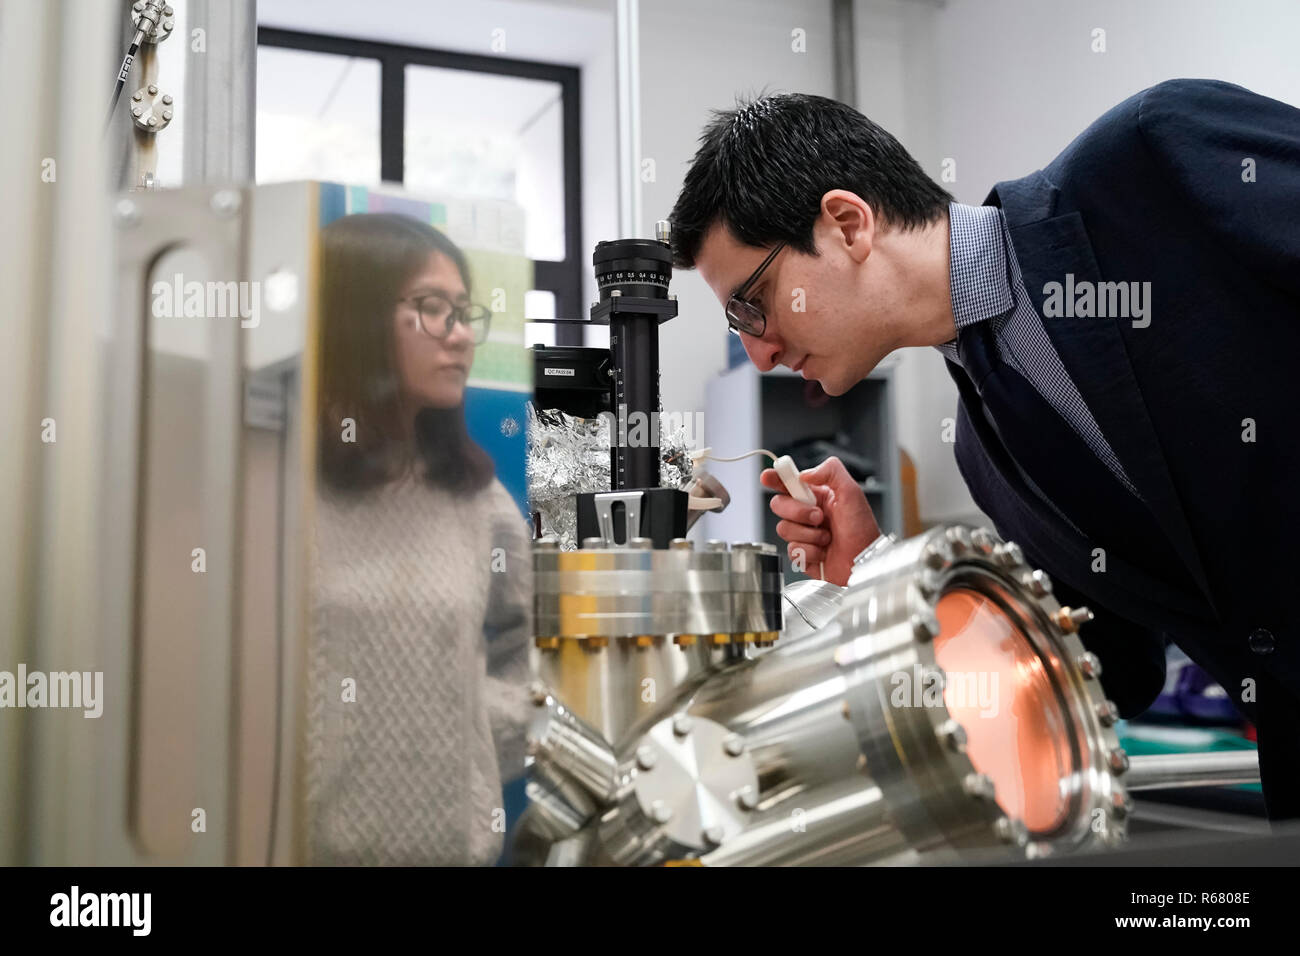 (181204) -- BEIJING, Dec. 4, 2018 (Xinhua) -- Carlos-Andres Palma works in a lab in Beijing, capital of China, Nov. 29, 2018. Carlos-Andres Palma, born in 1982, came from Germany to China in 2017 to work as a professor of physics of molecular architecture and interfaces at the Institute of Physics of the Chinese Academy of Sciences. The reason that he came to China was because the opening China can offer opportunities to young scientists like him to follow up and study the world's latest academic achievements and expand research fields, Carlos-Andres Palma said. 'In China, to young scien Stock Photo